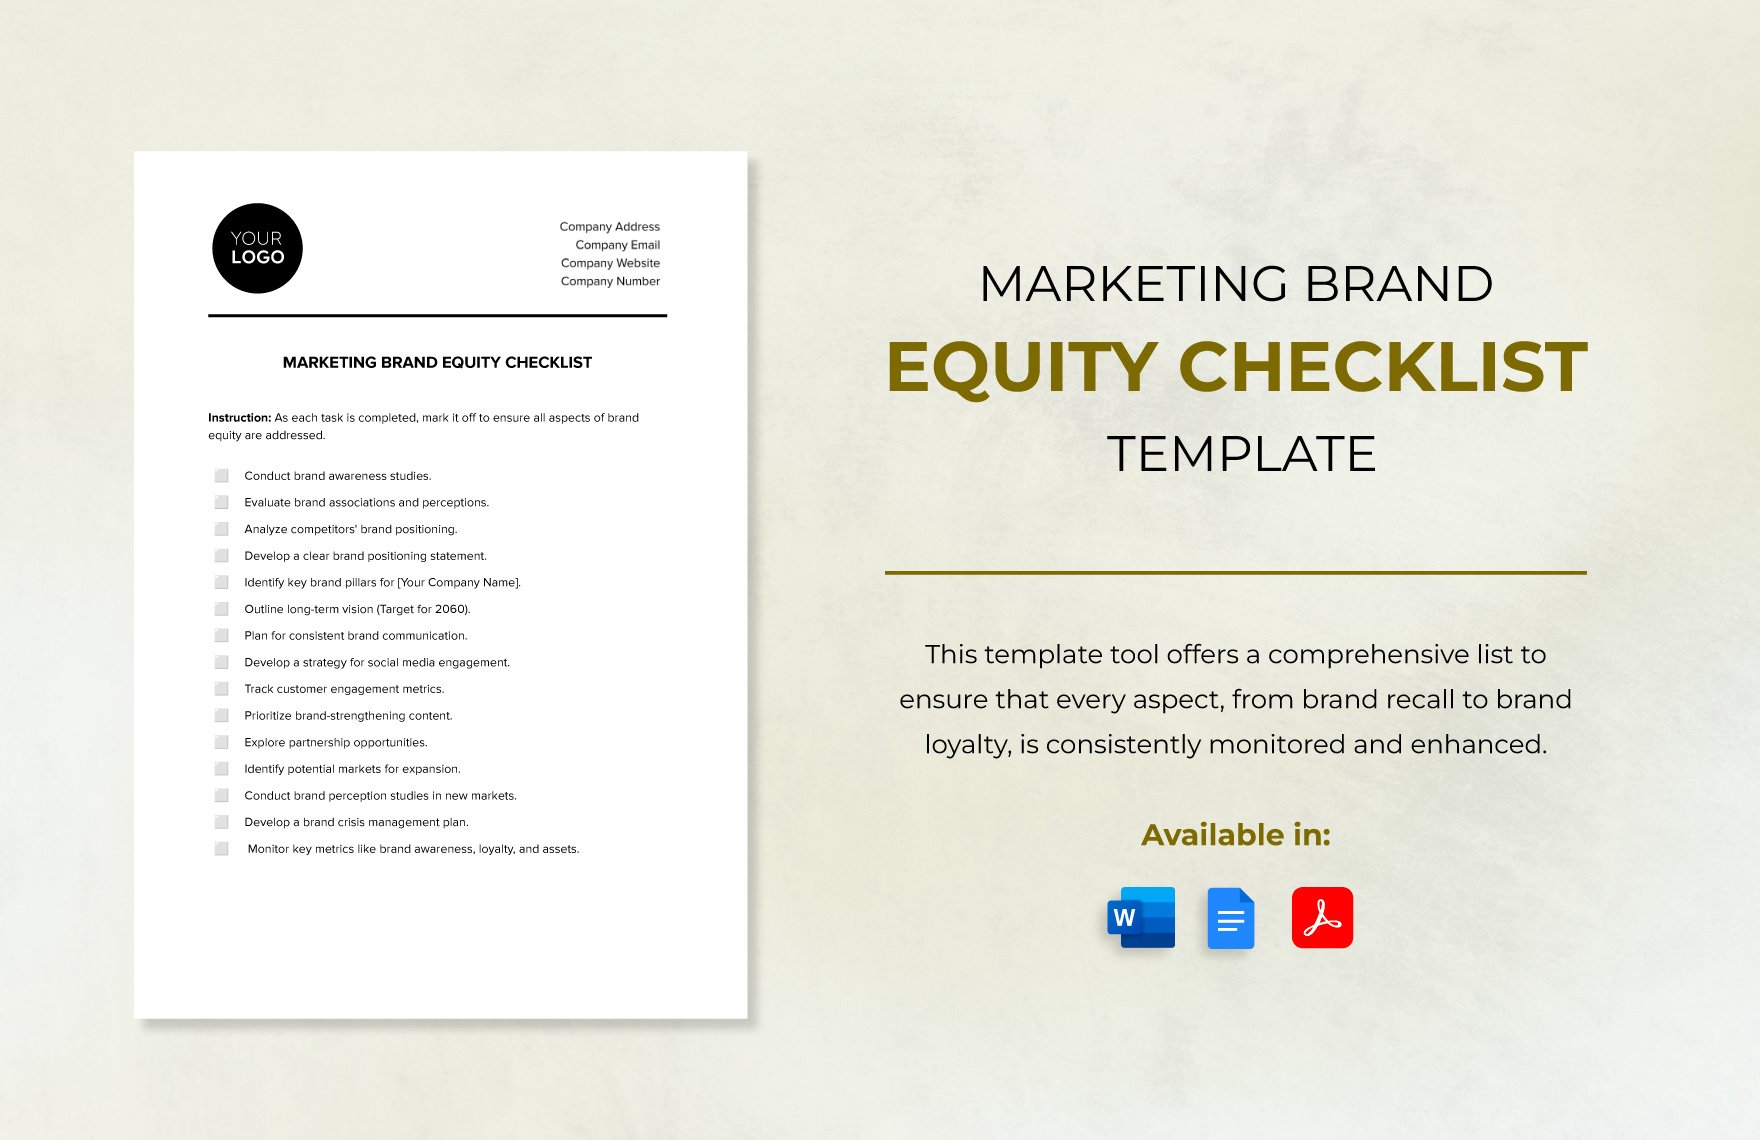 Marketing Brand Equity Checklist Template in Word, Google Docs, PDF